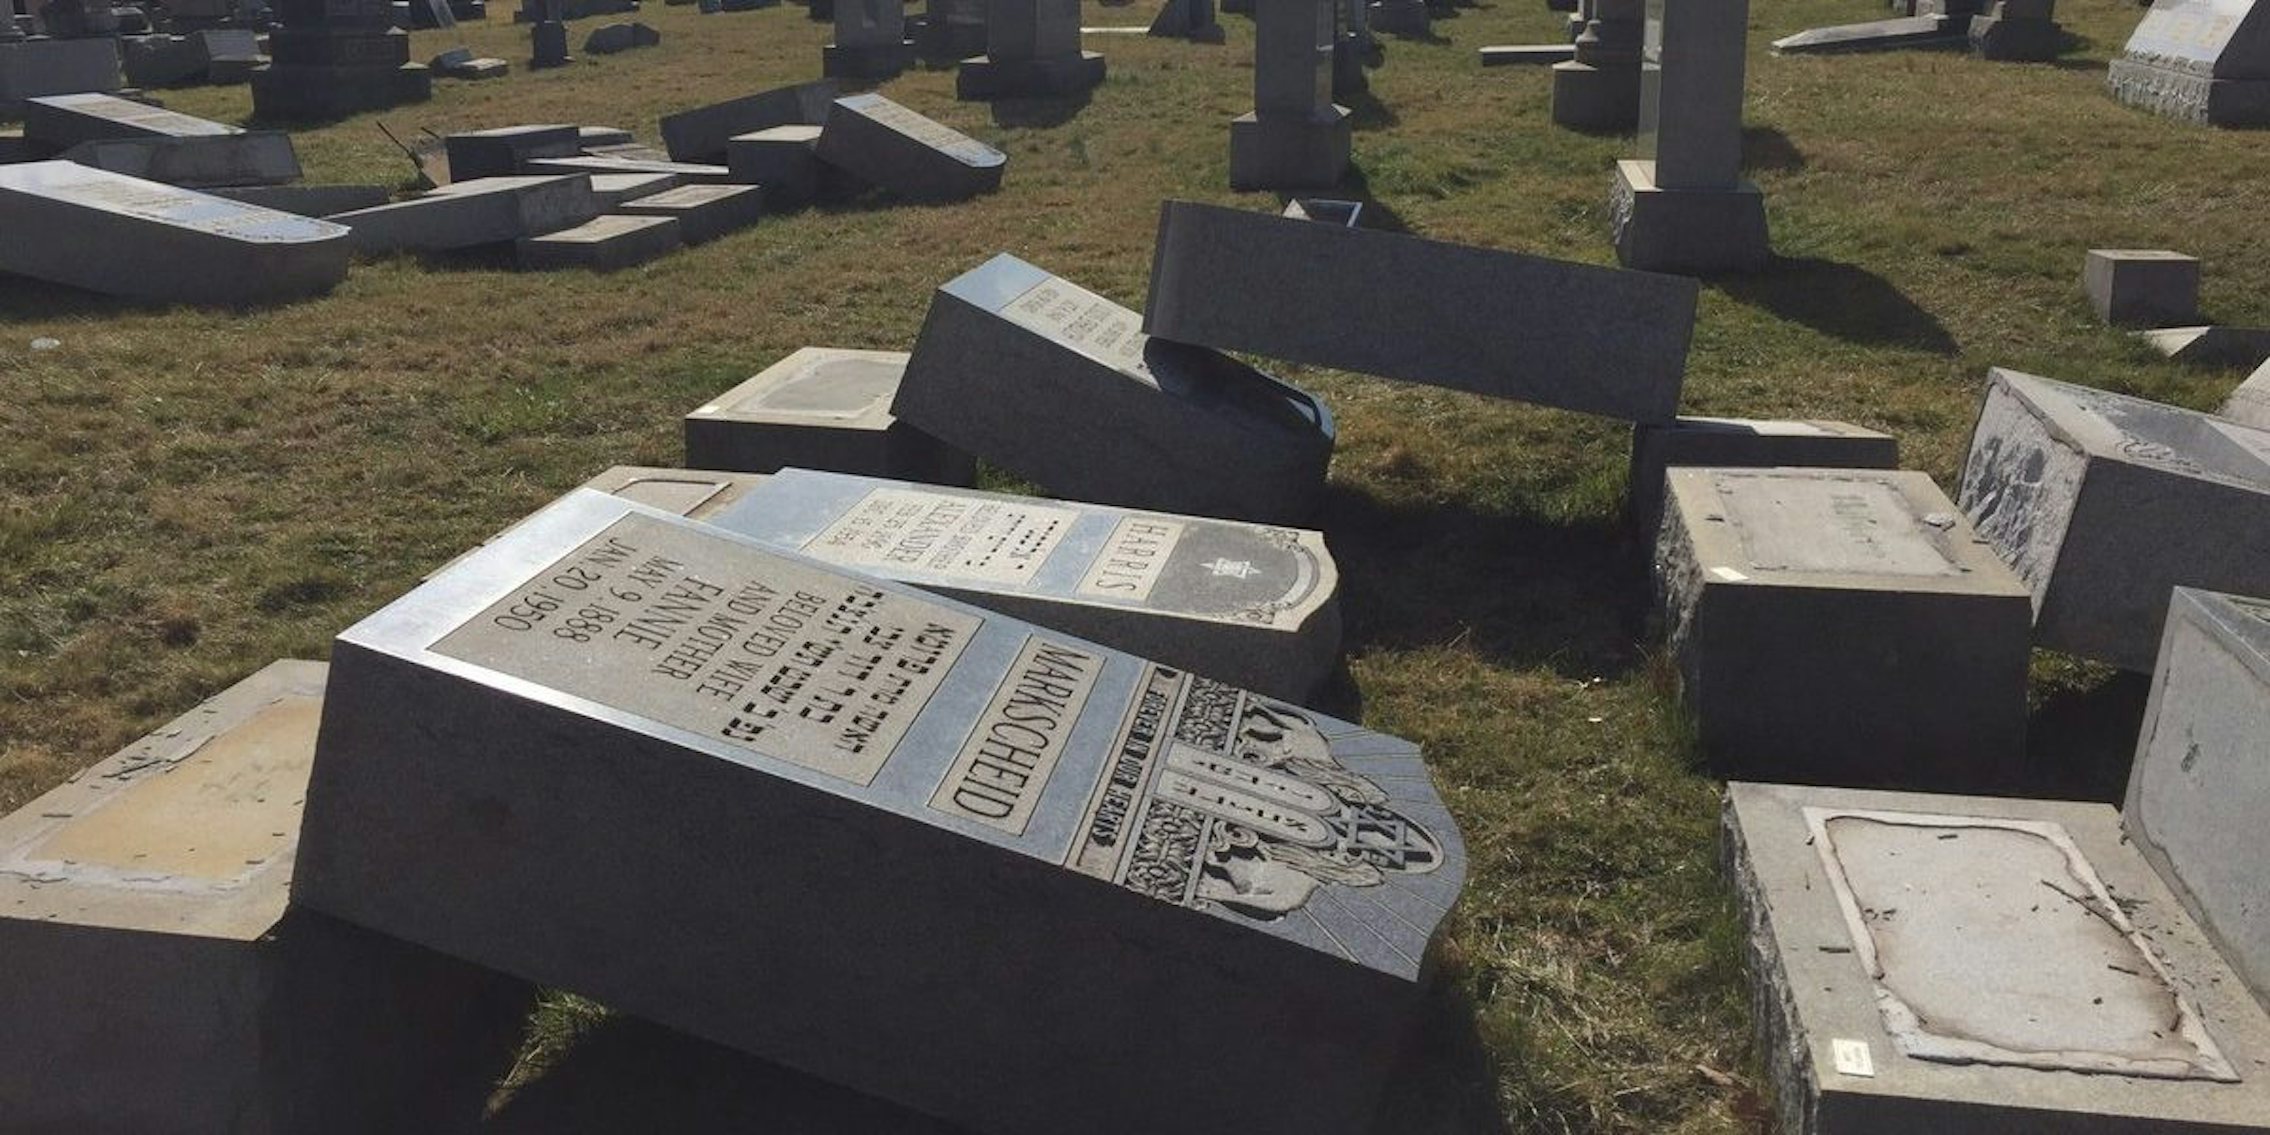 More than 100 grave markers were vandalized in Jewish cemetery in Philadelphia.